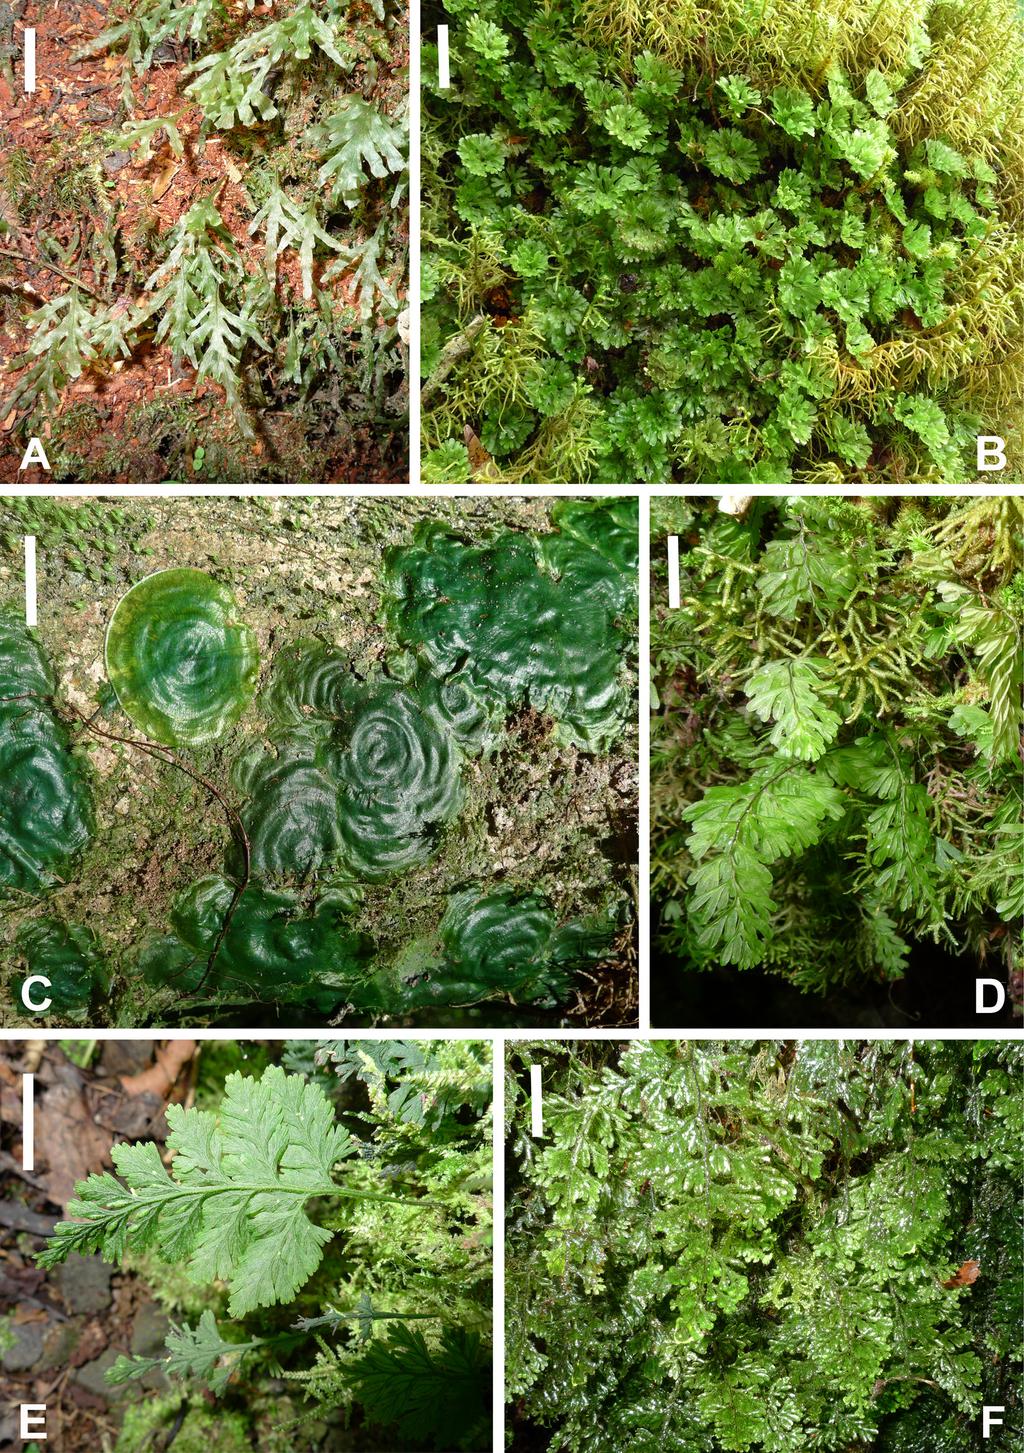 SAÏD A.H. et al., Hymenophyllaceae in Comoros Fig. 3. Representative Comorian Hymenophyllaceae as observed in situ in rainforests (here from Grande Comore or Mohéli). A. Endemic Didymoglossum kirkii (Hook.